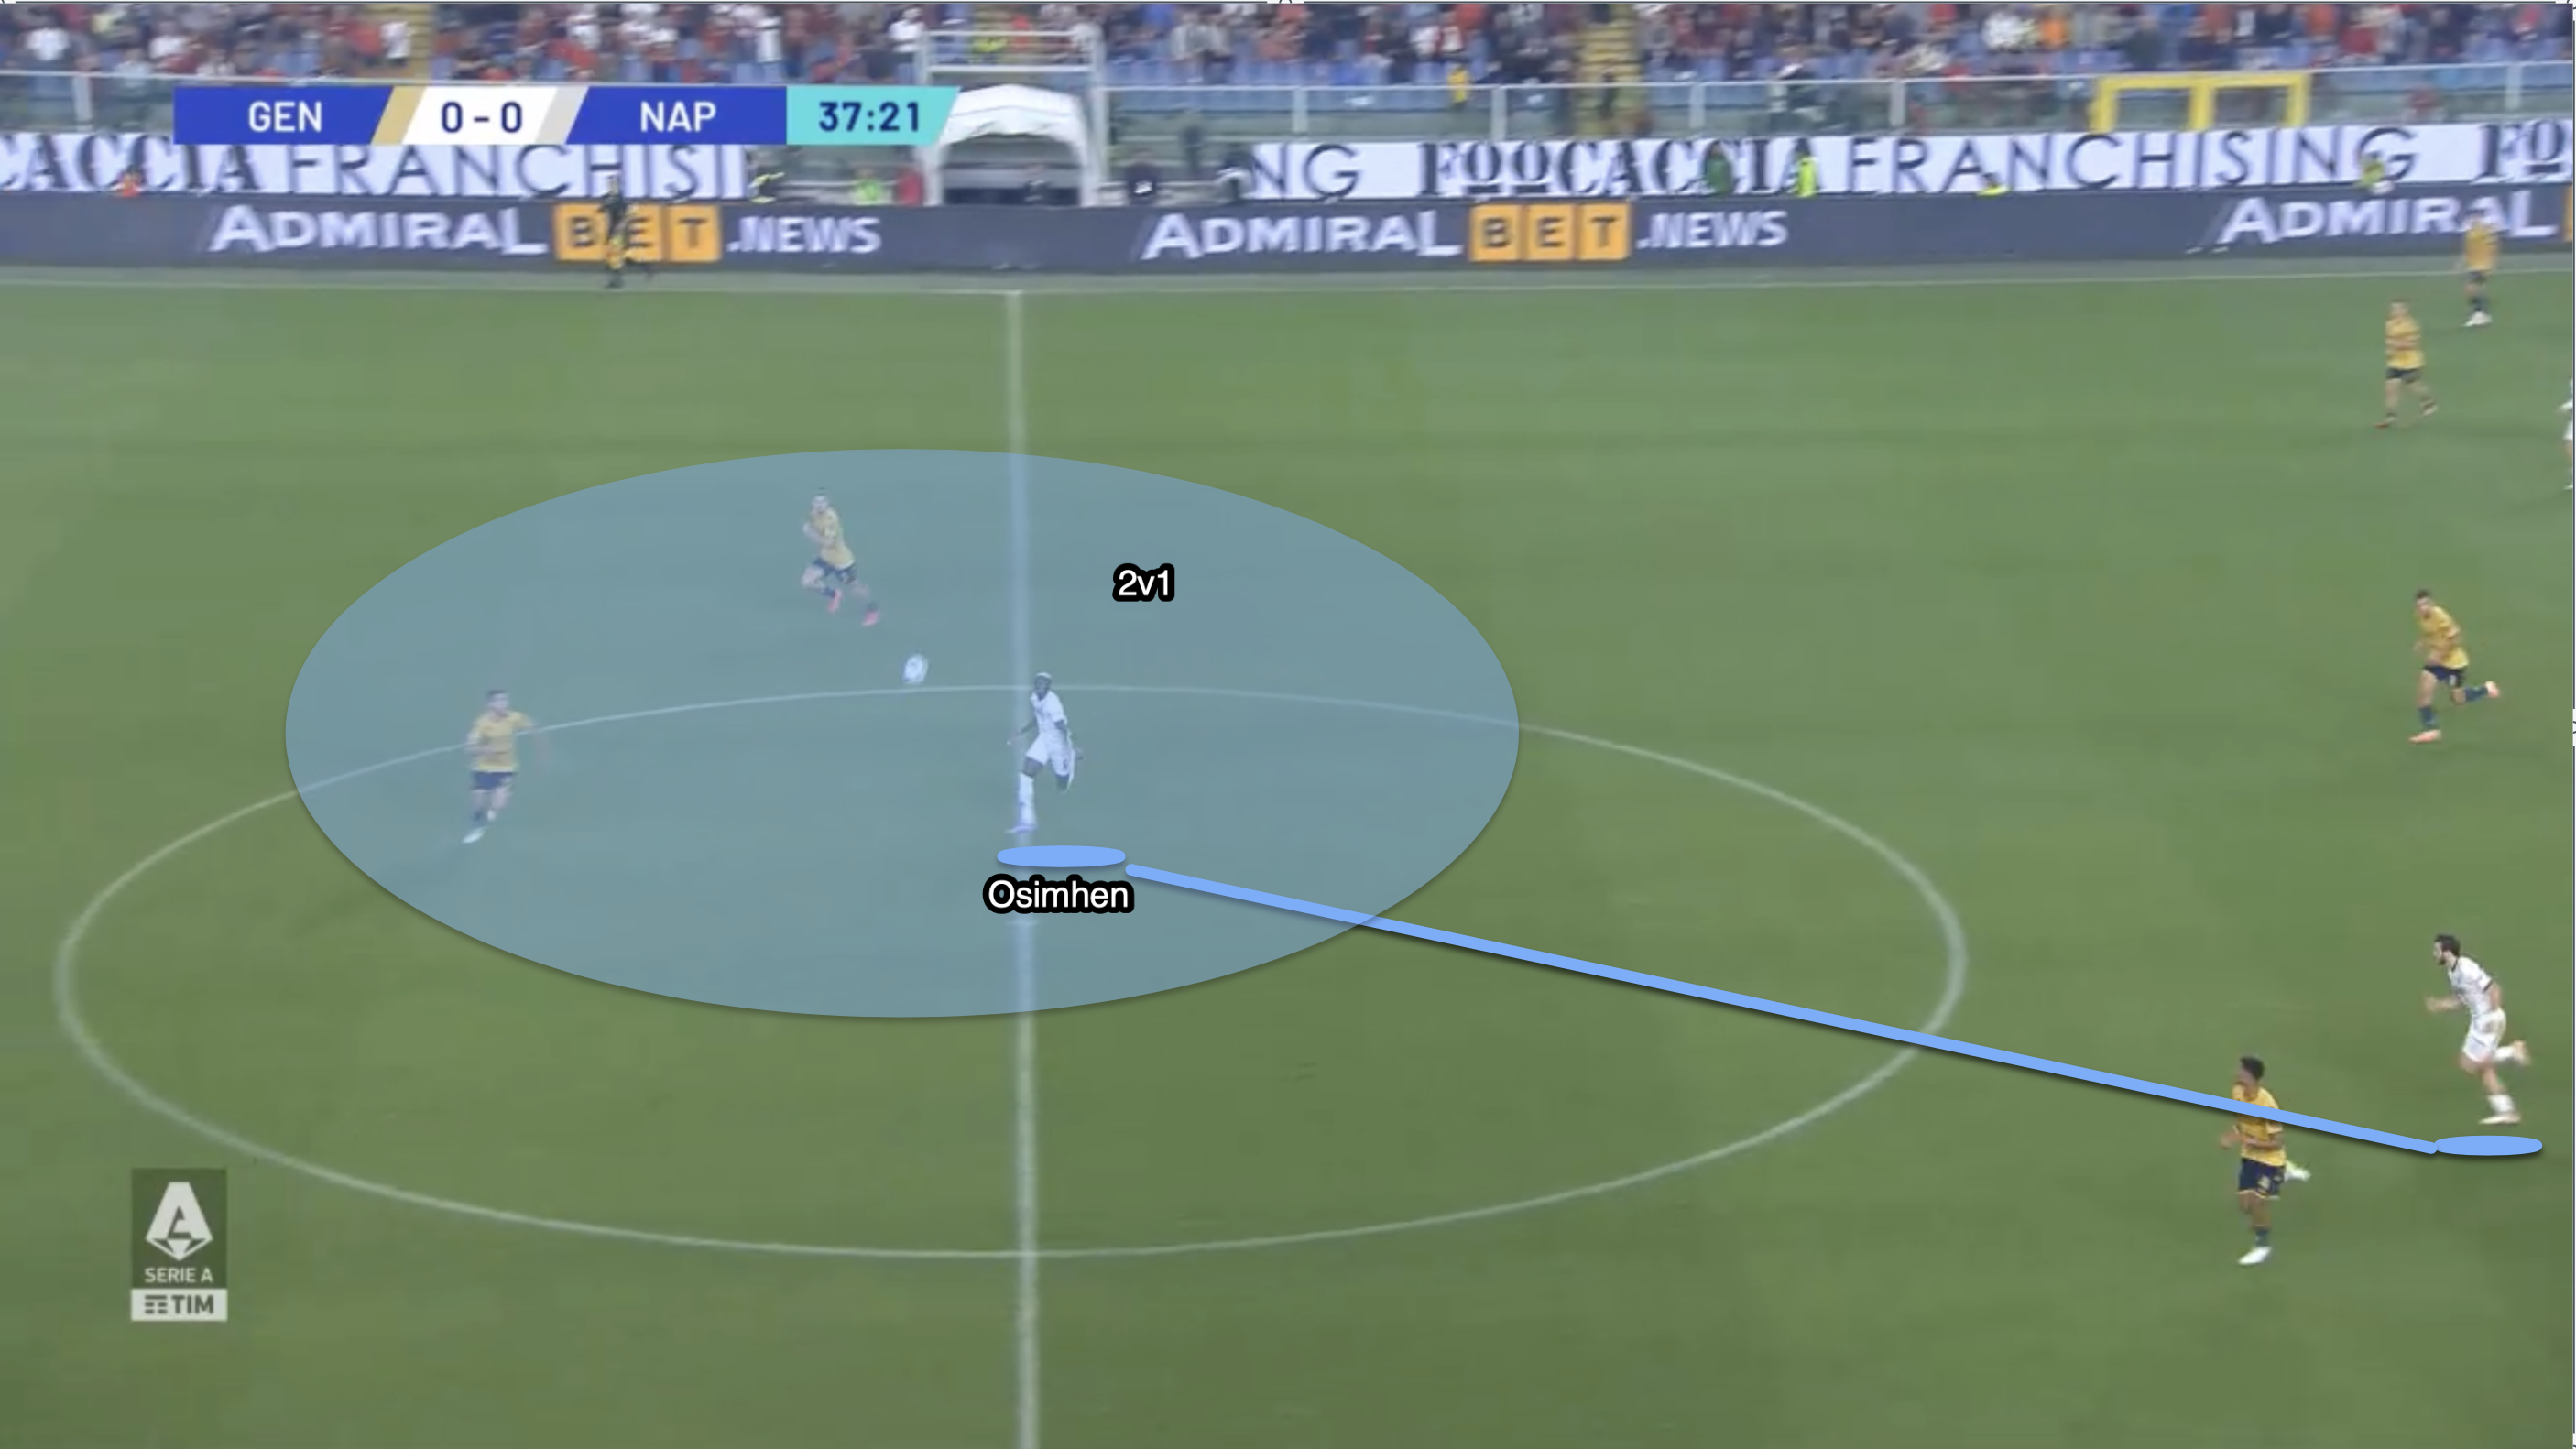 Napoli are on the counter-attack and the ball has been played towards the opposition half with Osimhen as the only player near the ball. He is up against two defenders but not only does he have the pace to reach the ball first he is powerful enough to outplay the first defender before driving towards goal